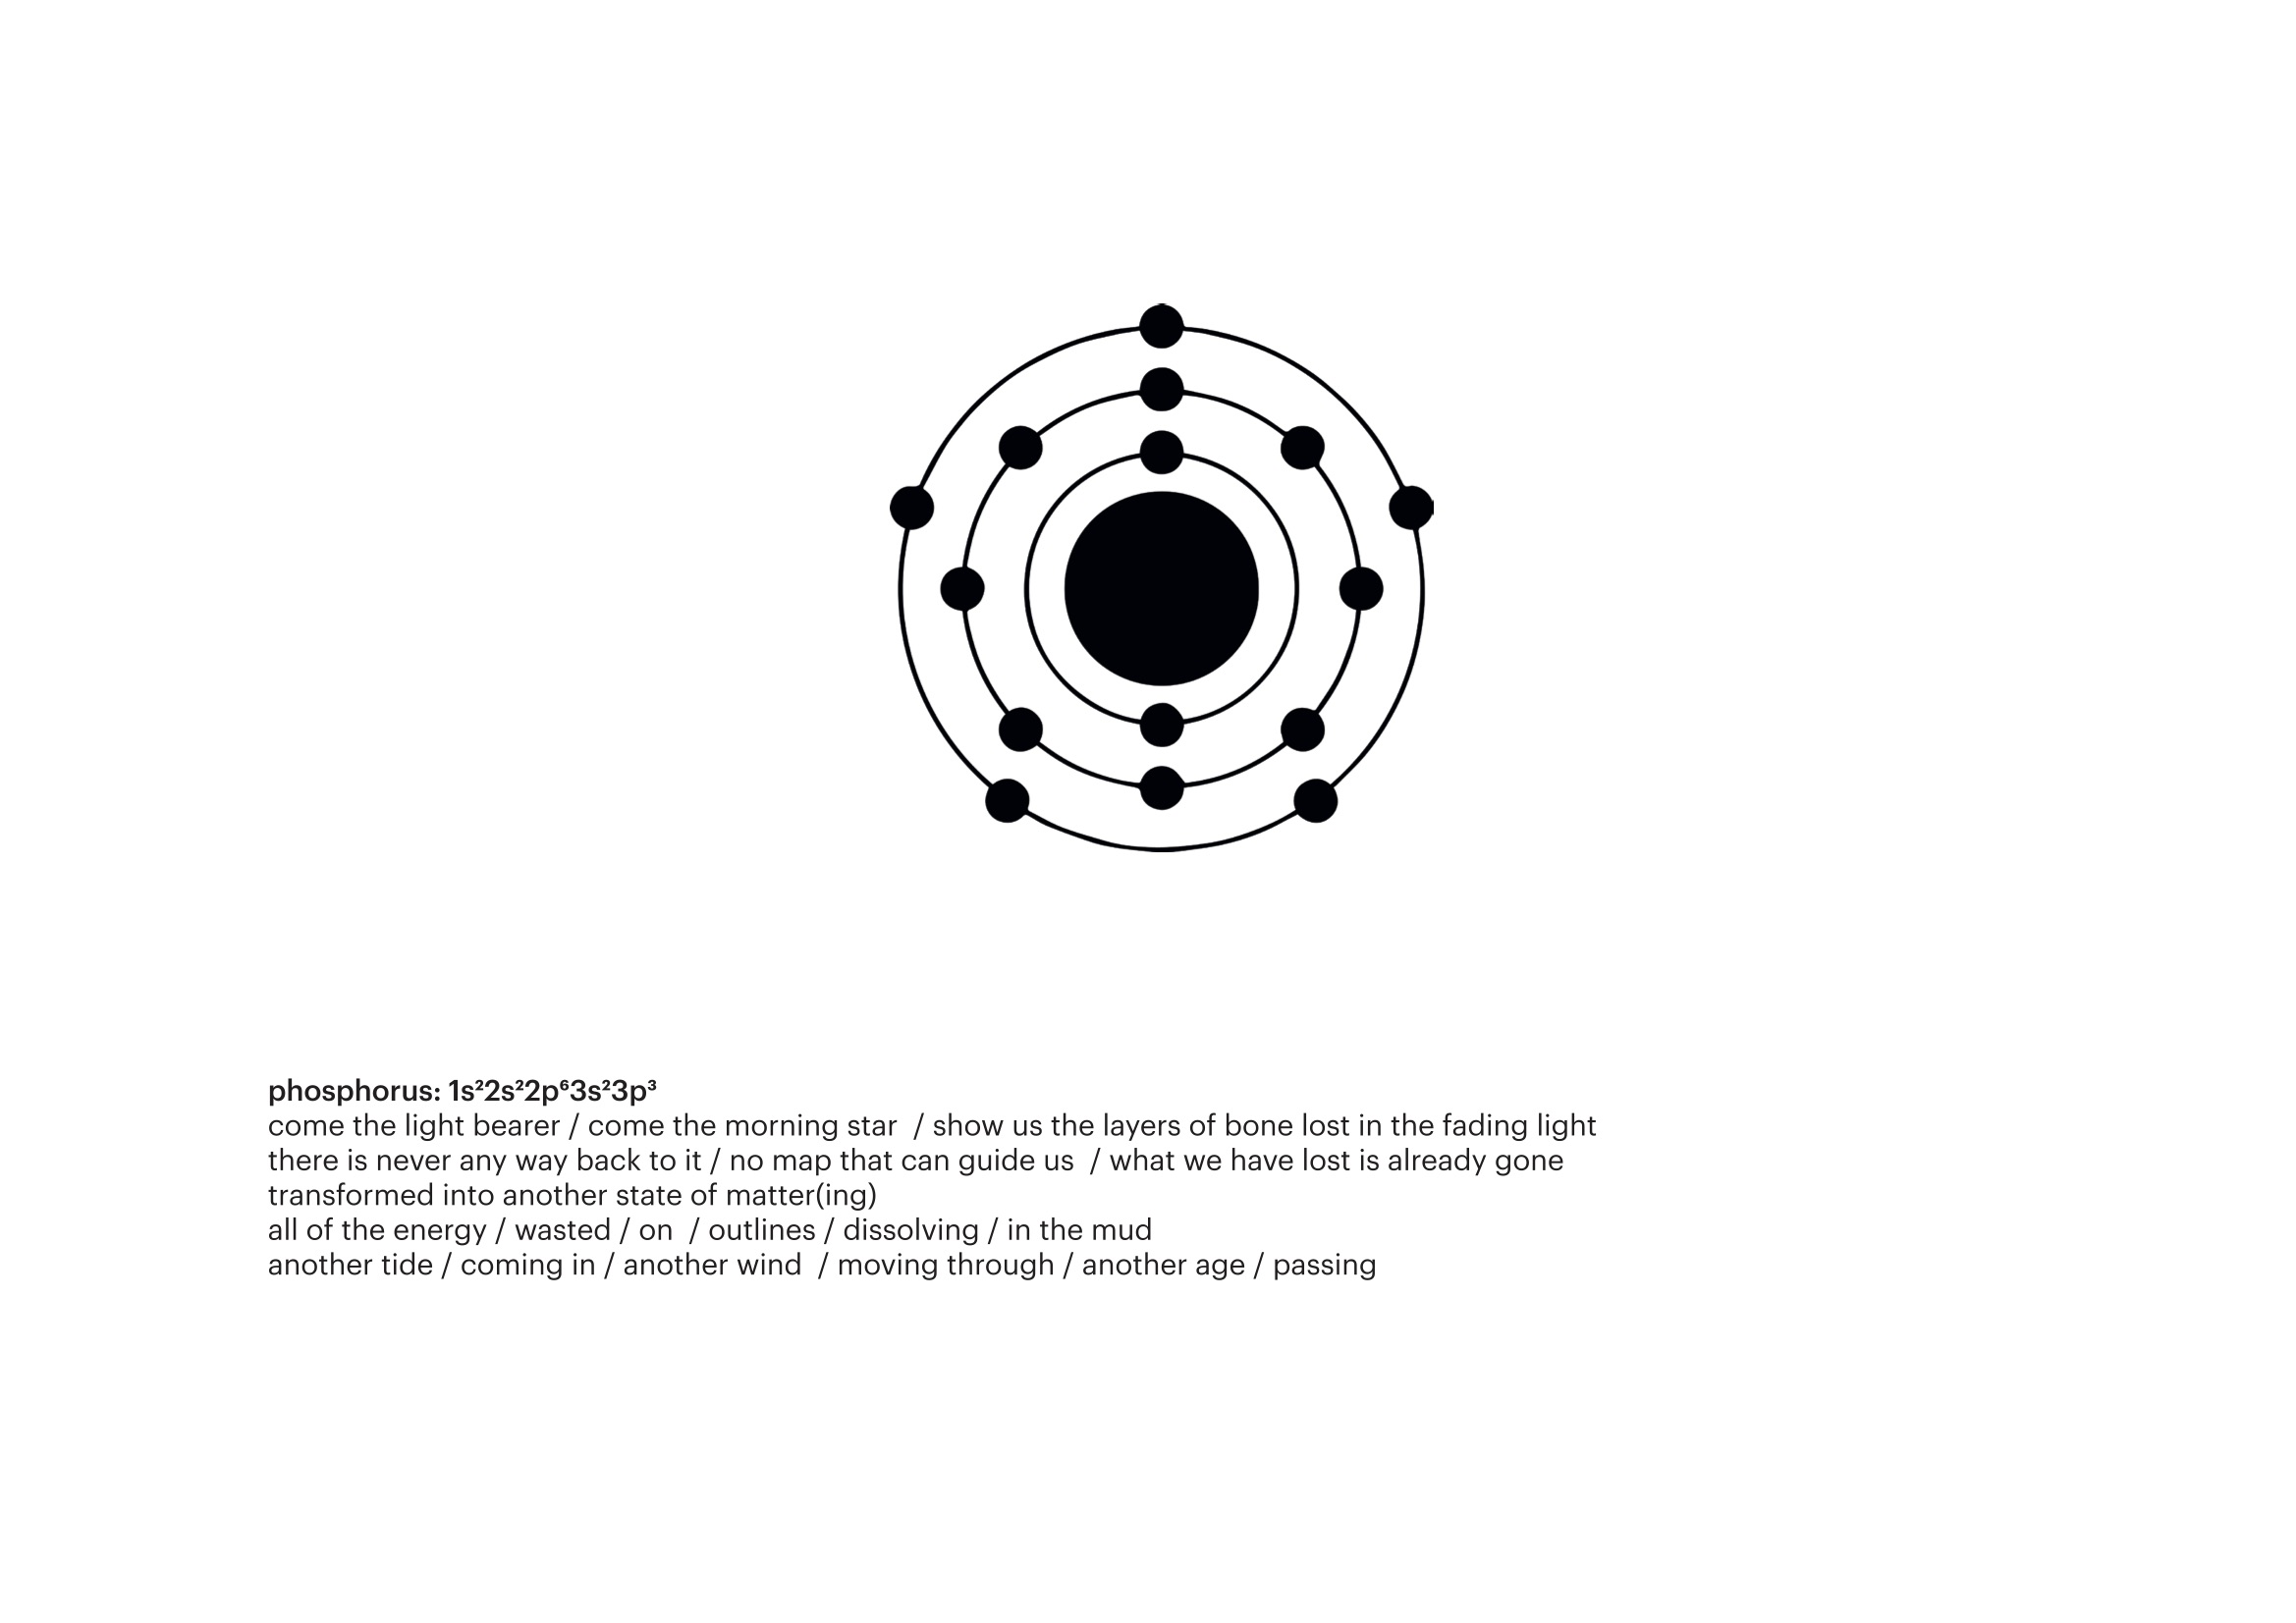 Centered in the top of the layout is a black and white drawing of a phosphorus atom. Below that in bold is the title of a a poem: ‘phosphorus: 1s22s22p63s23p3’. Underneath is the poem: ’come the light bearer / come the morning star / show us the layers of bone lost in the fading light/ there is never any way back to it / no map that can guide us / what we have lost is already gone/ transformed into another state of matter(ing)/ all of the energy / wasted / on / outlines / dissolving / in the mud/ another tide / coming in / another wind / moving through / another age / passing